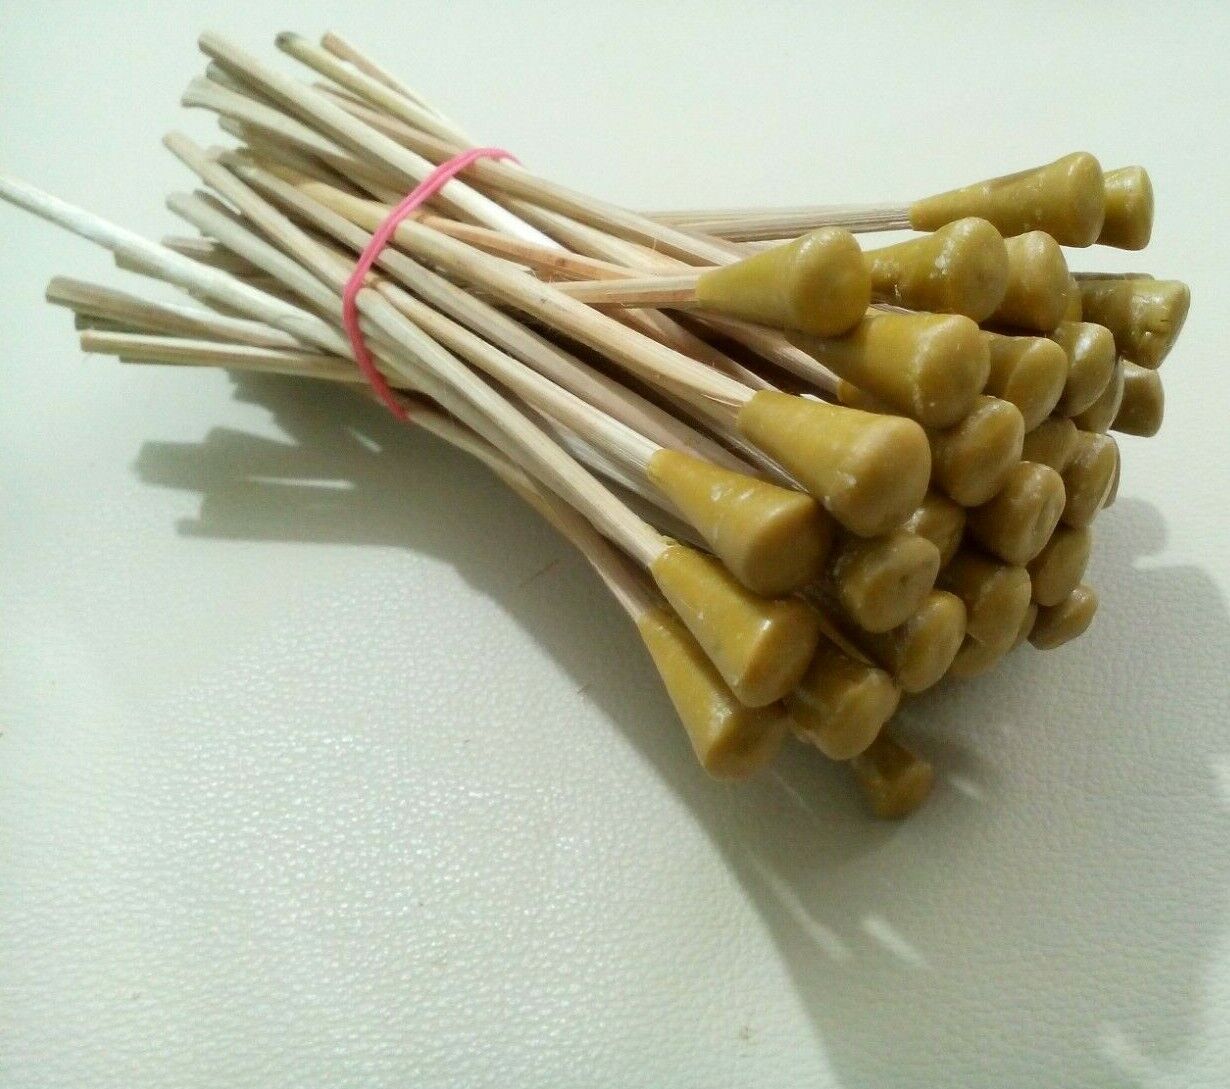 50 Piece Wooden Dop Stick with Gemstone Grinding And Faceting Polishing Quantity